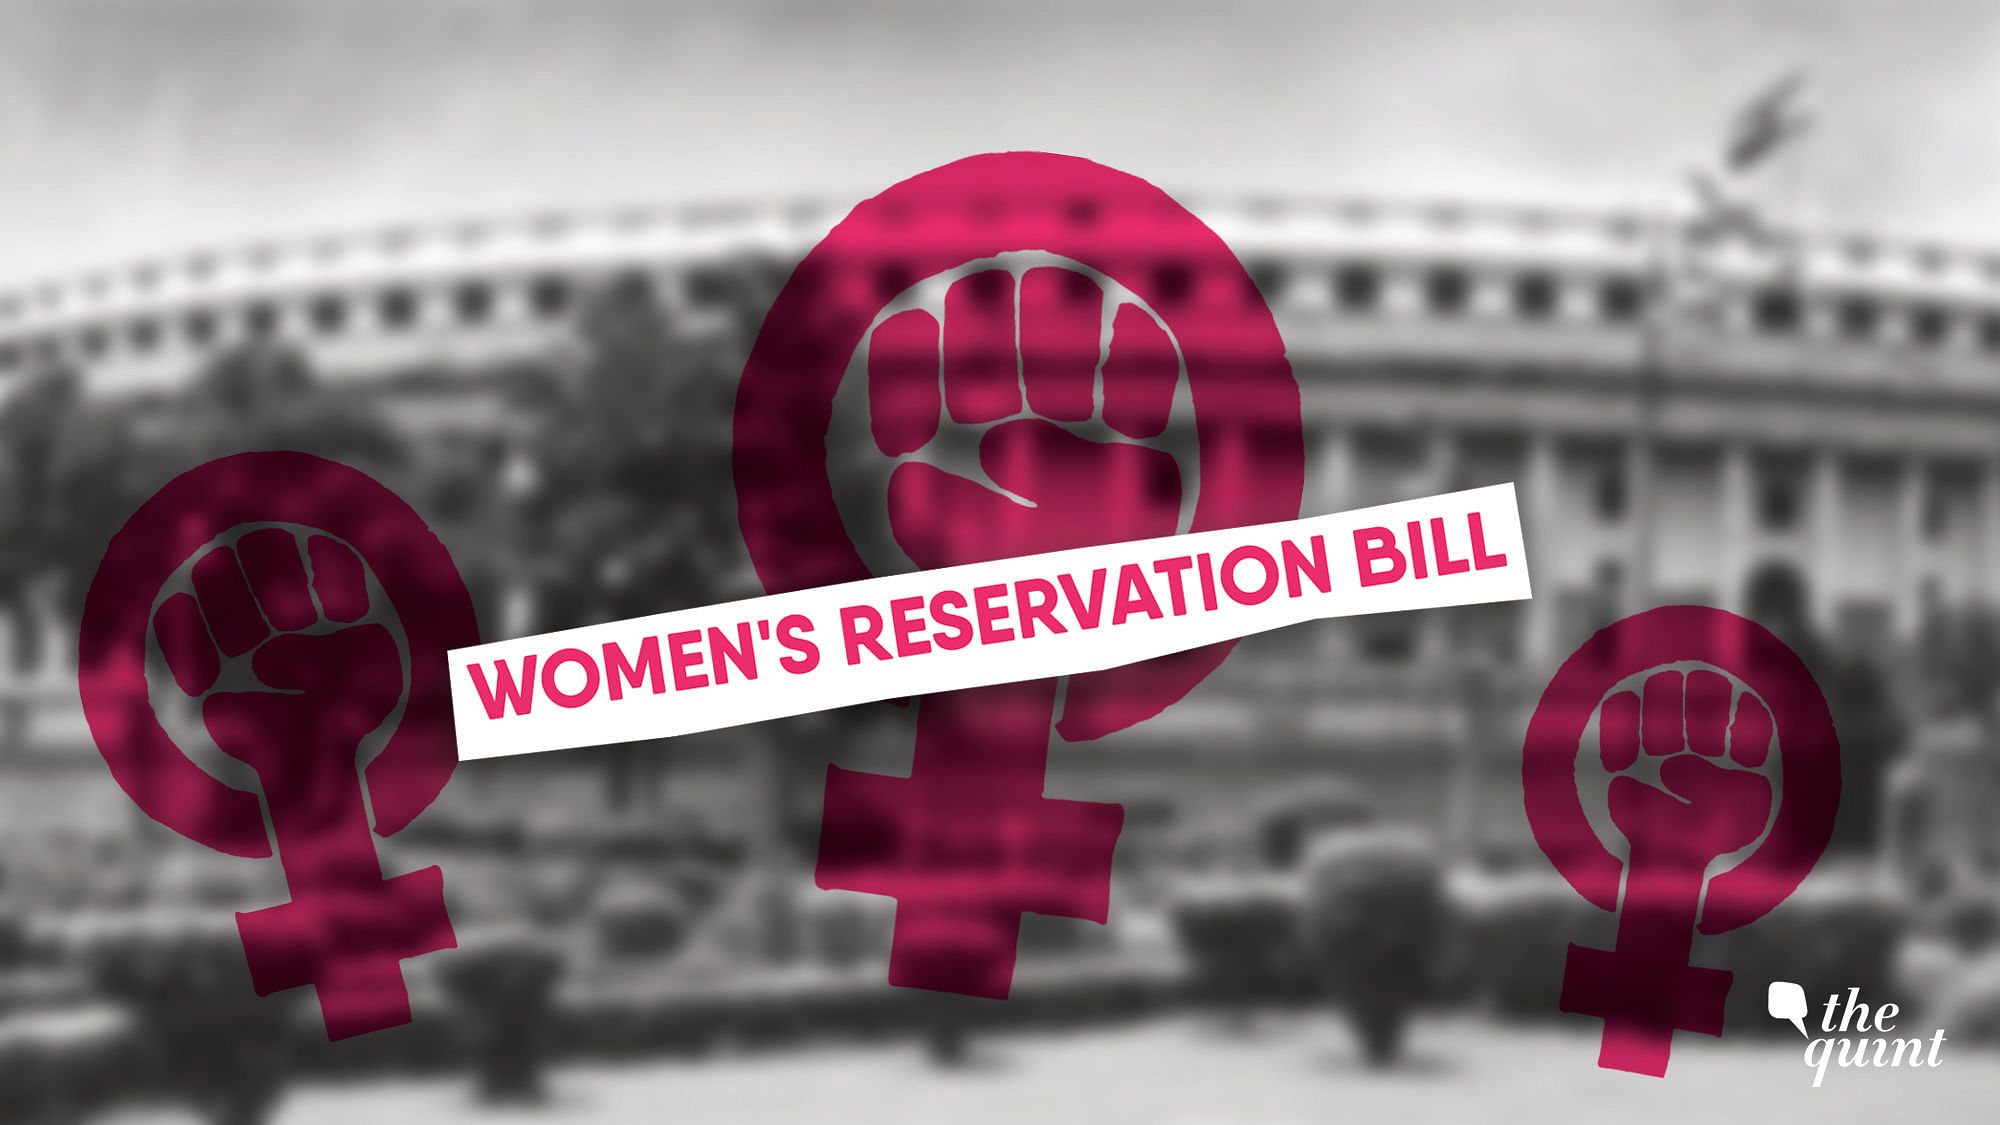 The house of law needs more than a token representation of women to fight for women’s issues.